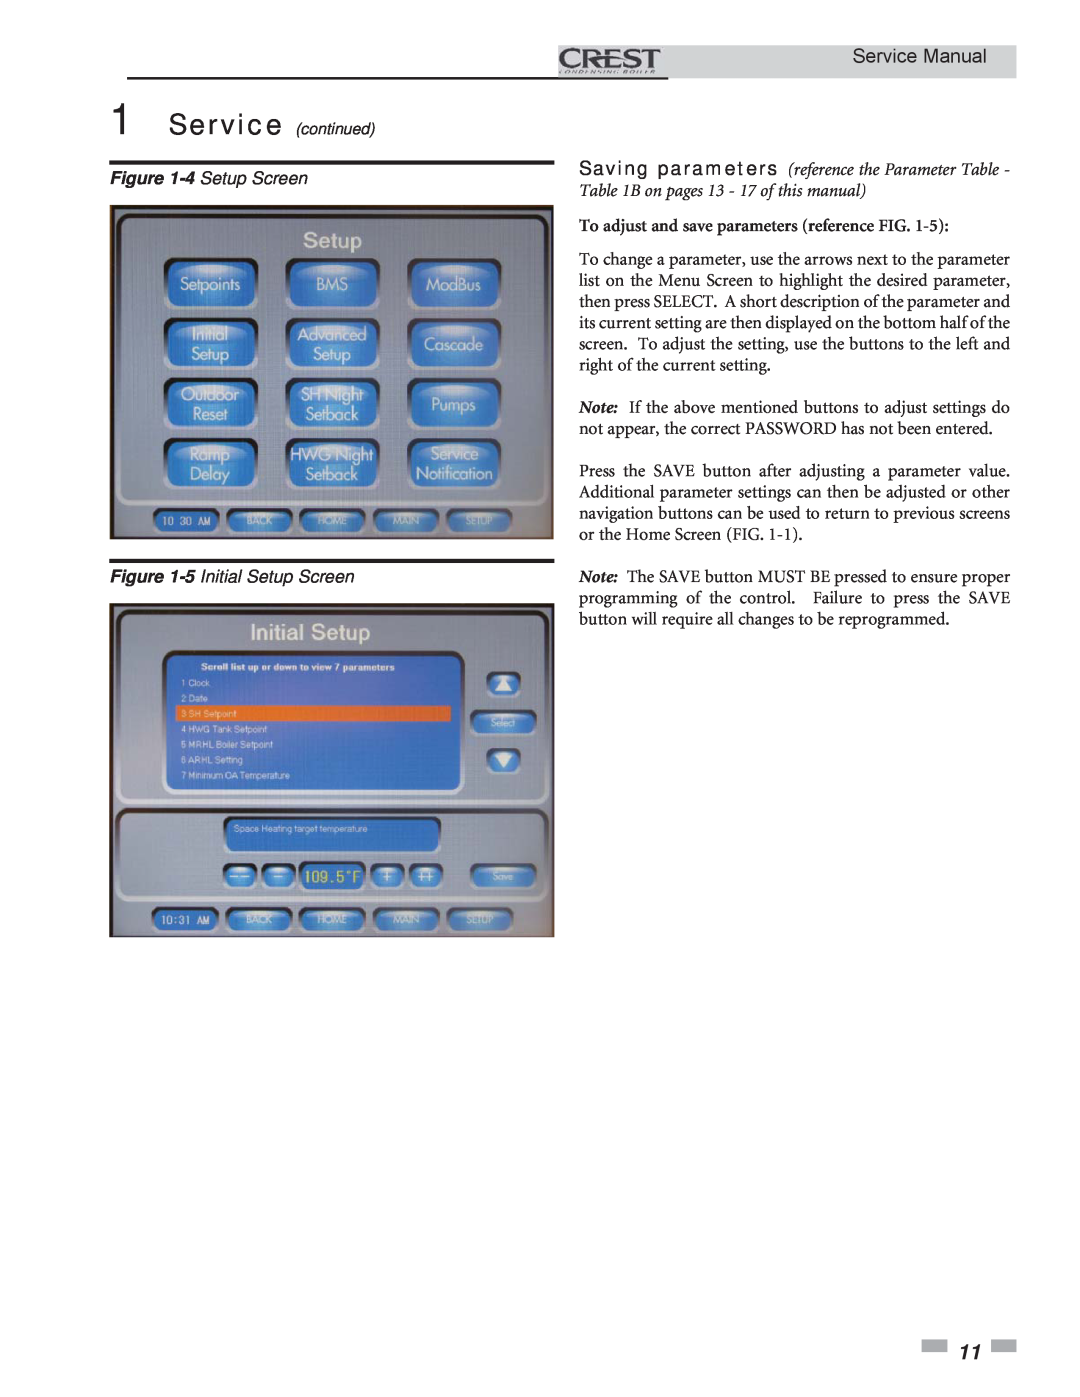 Lochinvar 3.5, 1.5, 2.5 service manual 4 Setup Screen, 5 Initial Setup Screen, To adjust and save parameters reference FIG 